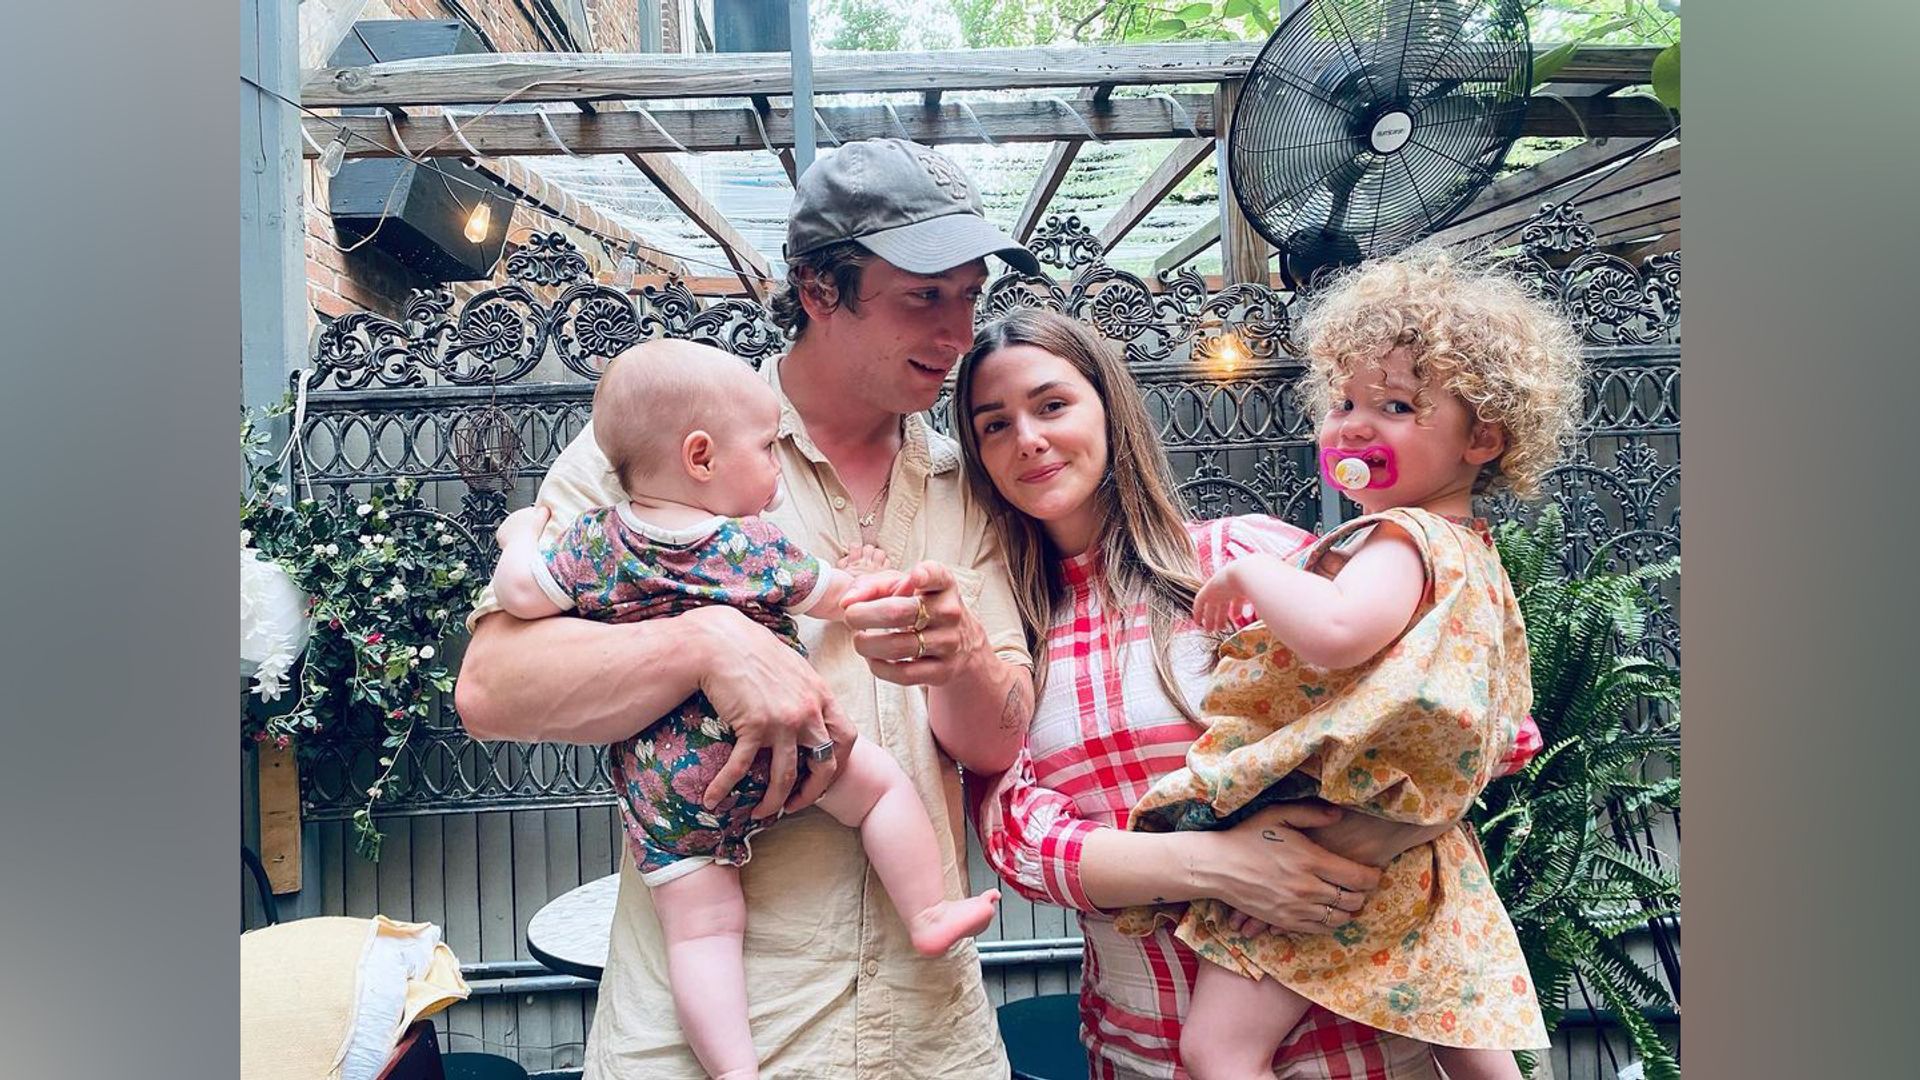 Jeremy Allen White with his wife and children